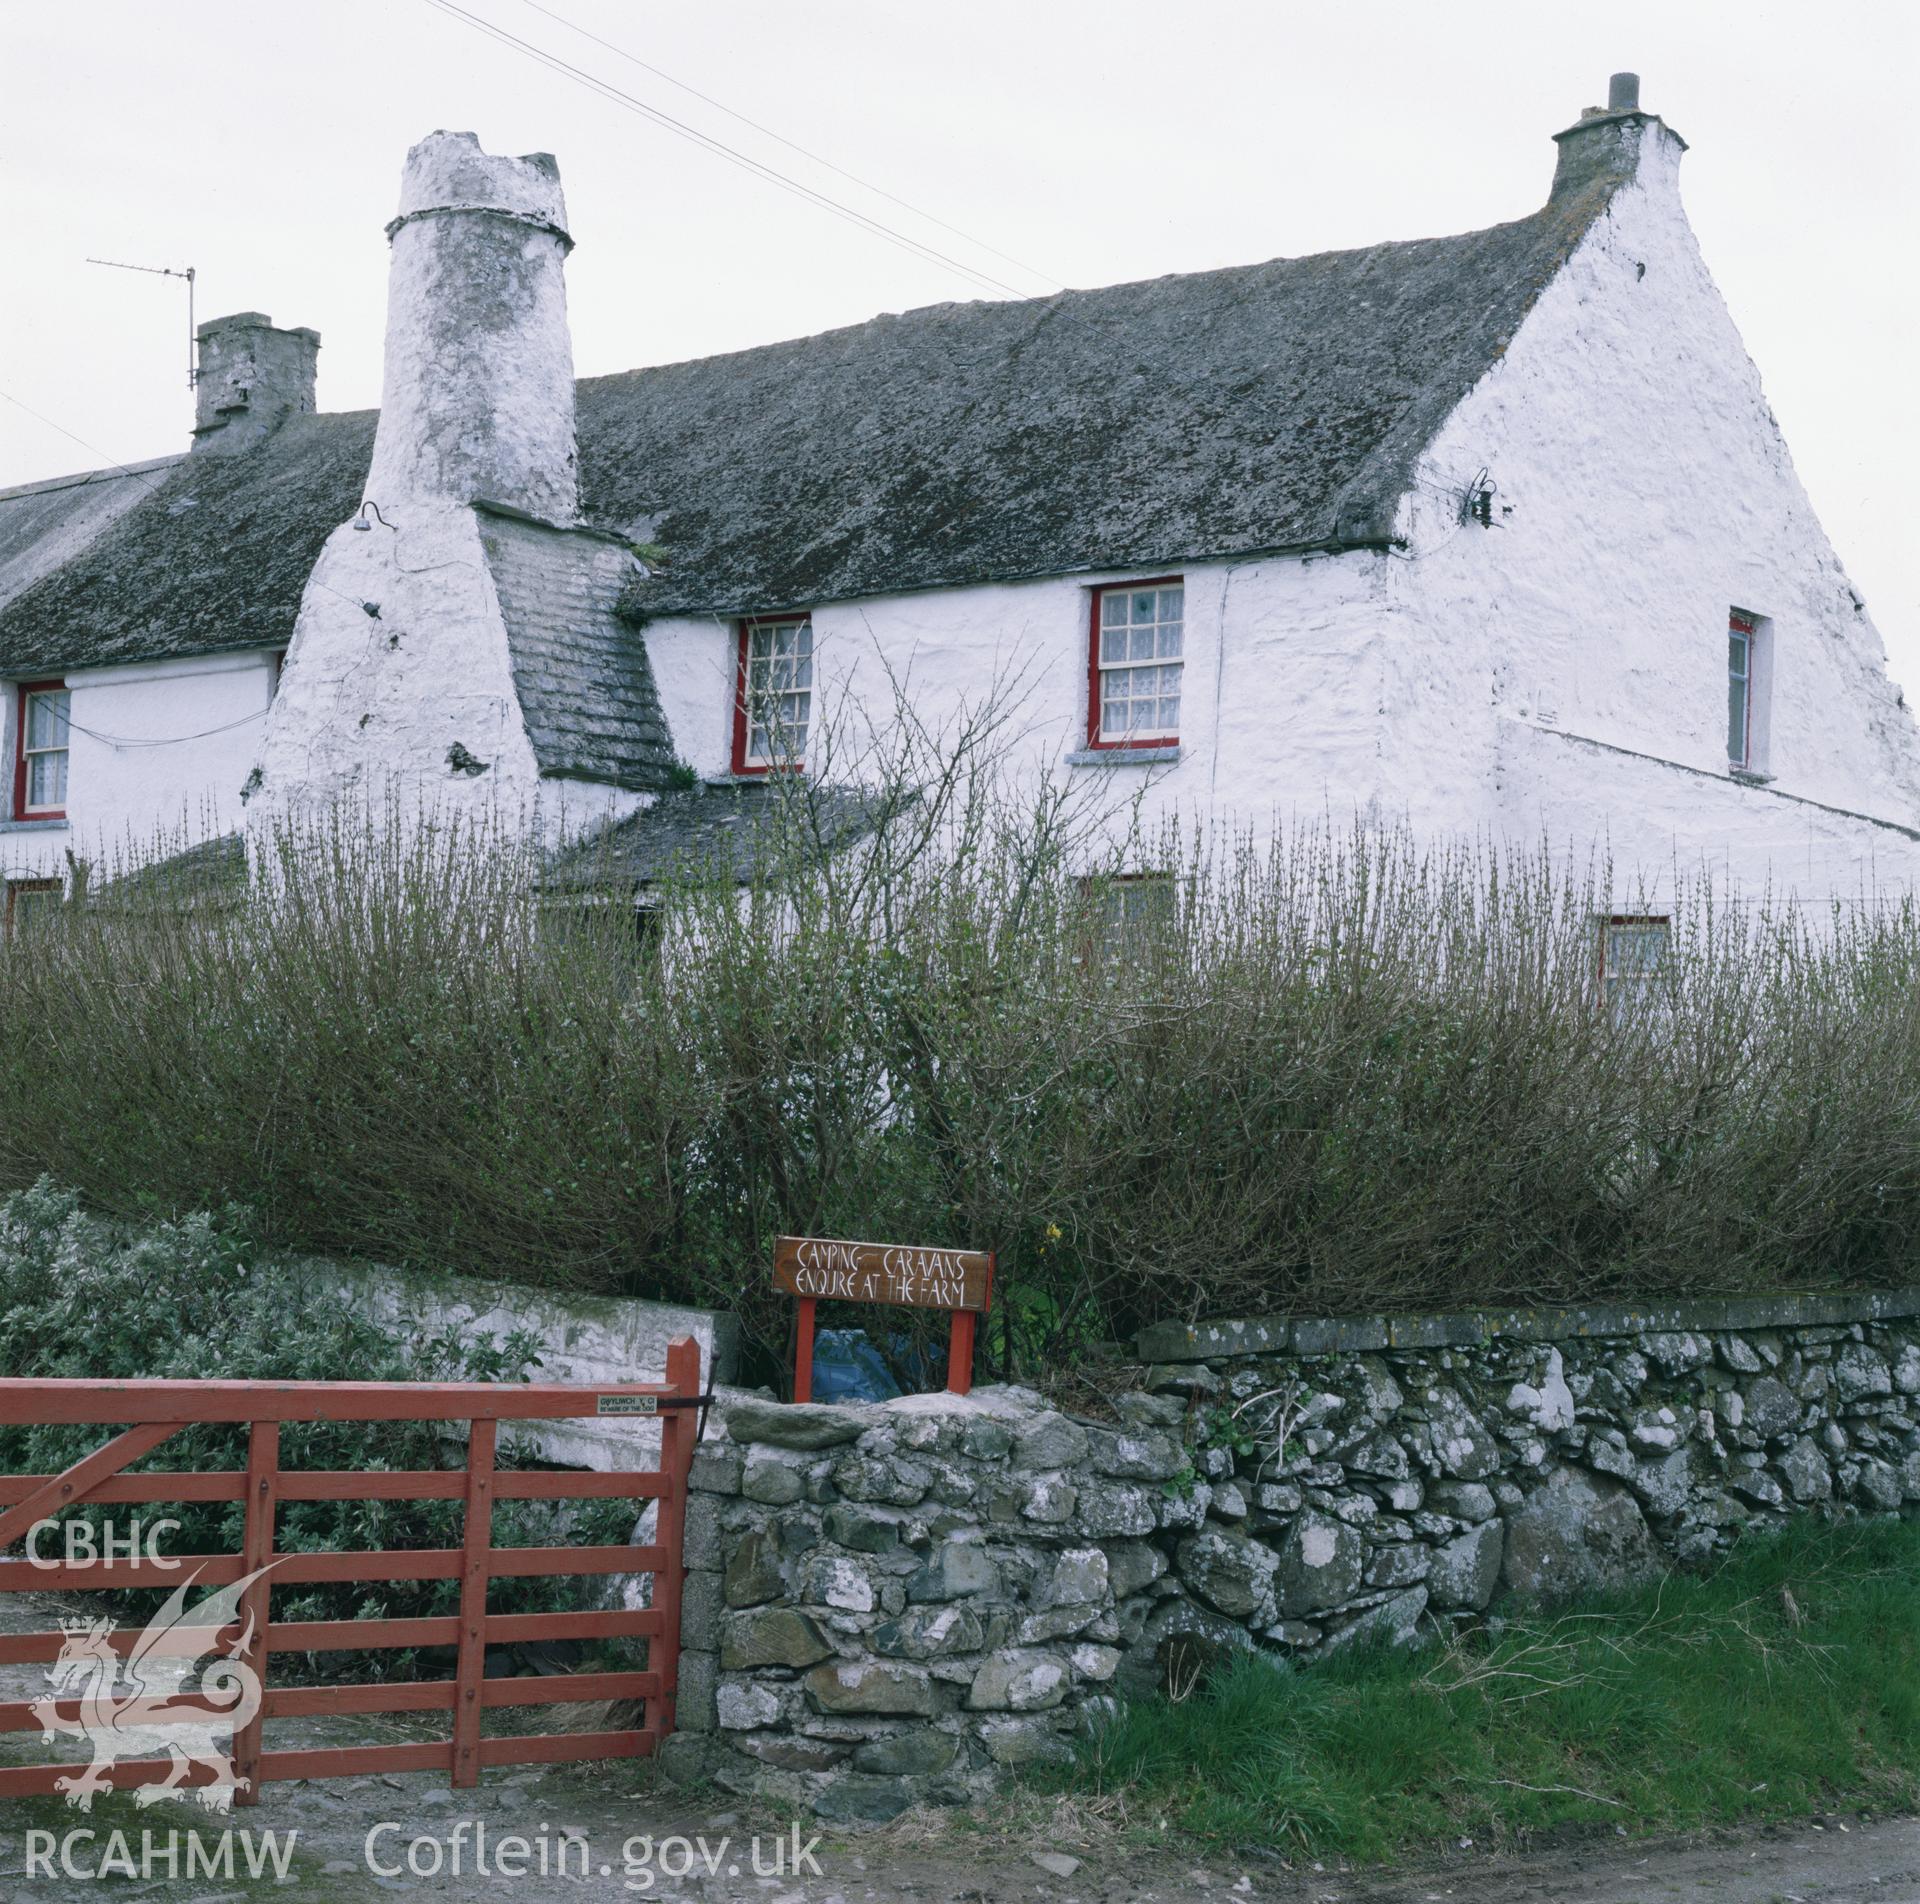 RCAHMW colour transparency showing exterior view of Rhosson Uchaf, St Davids.